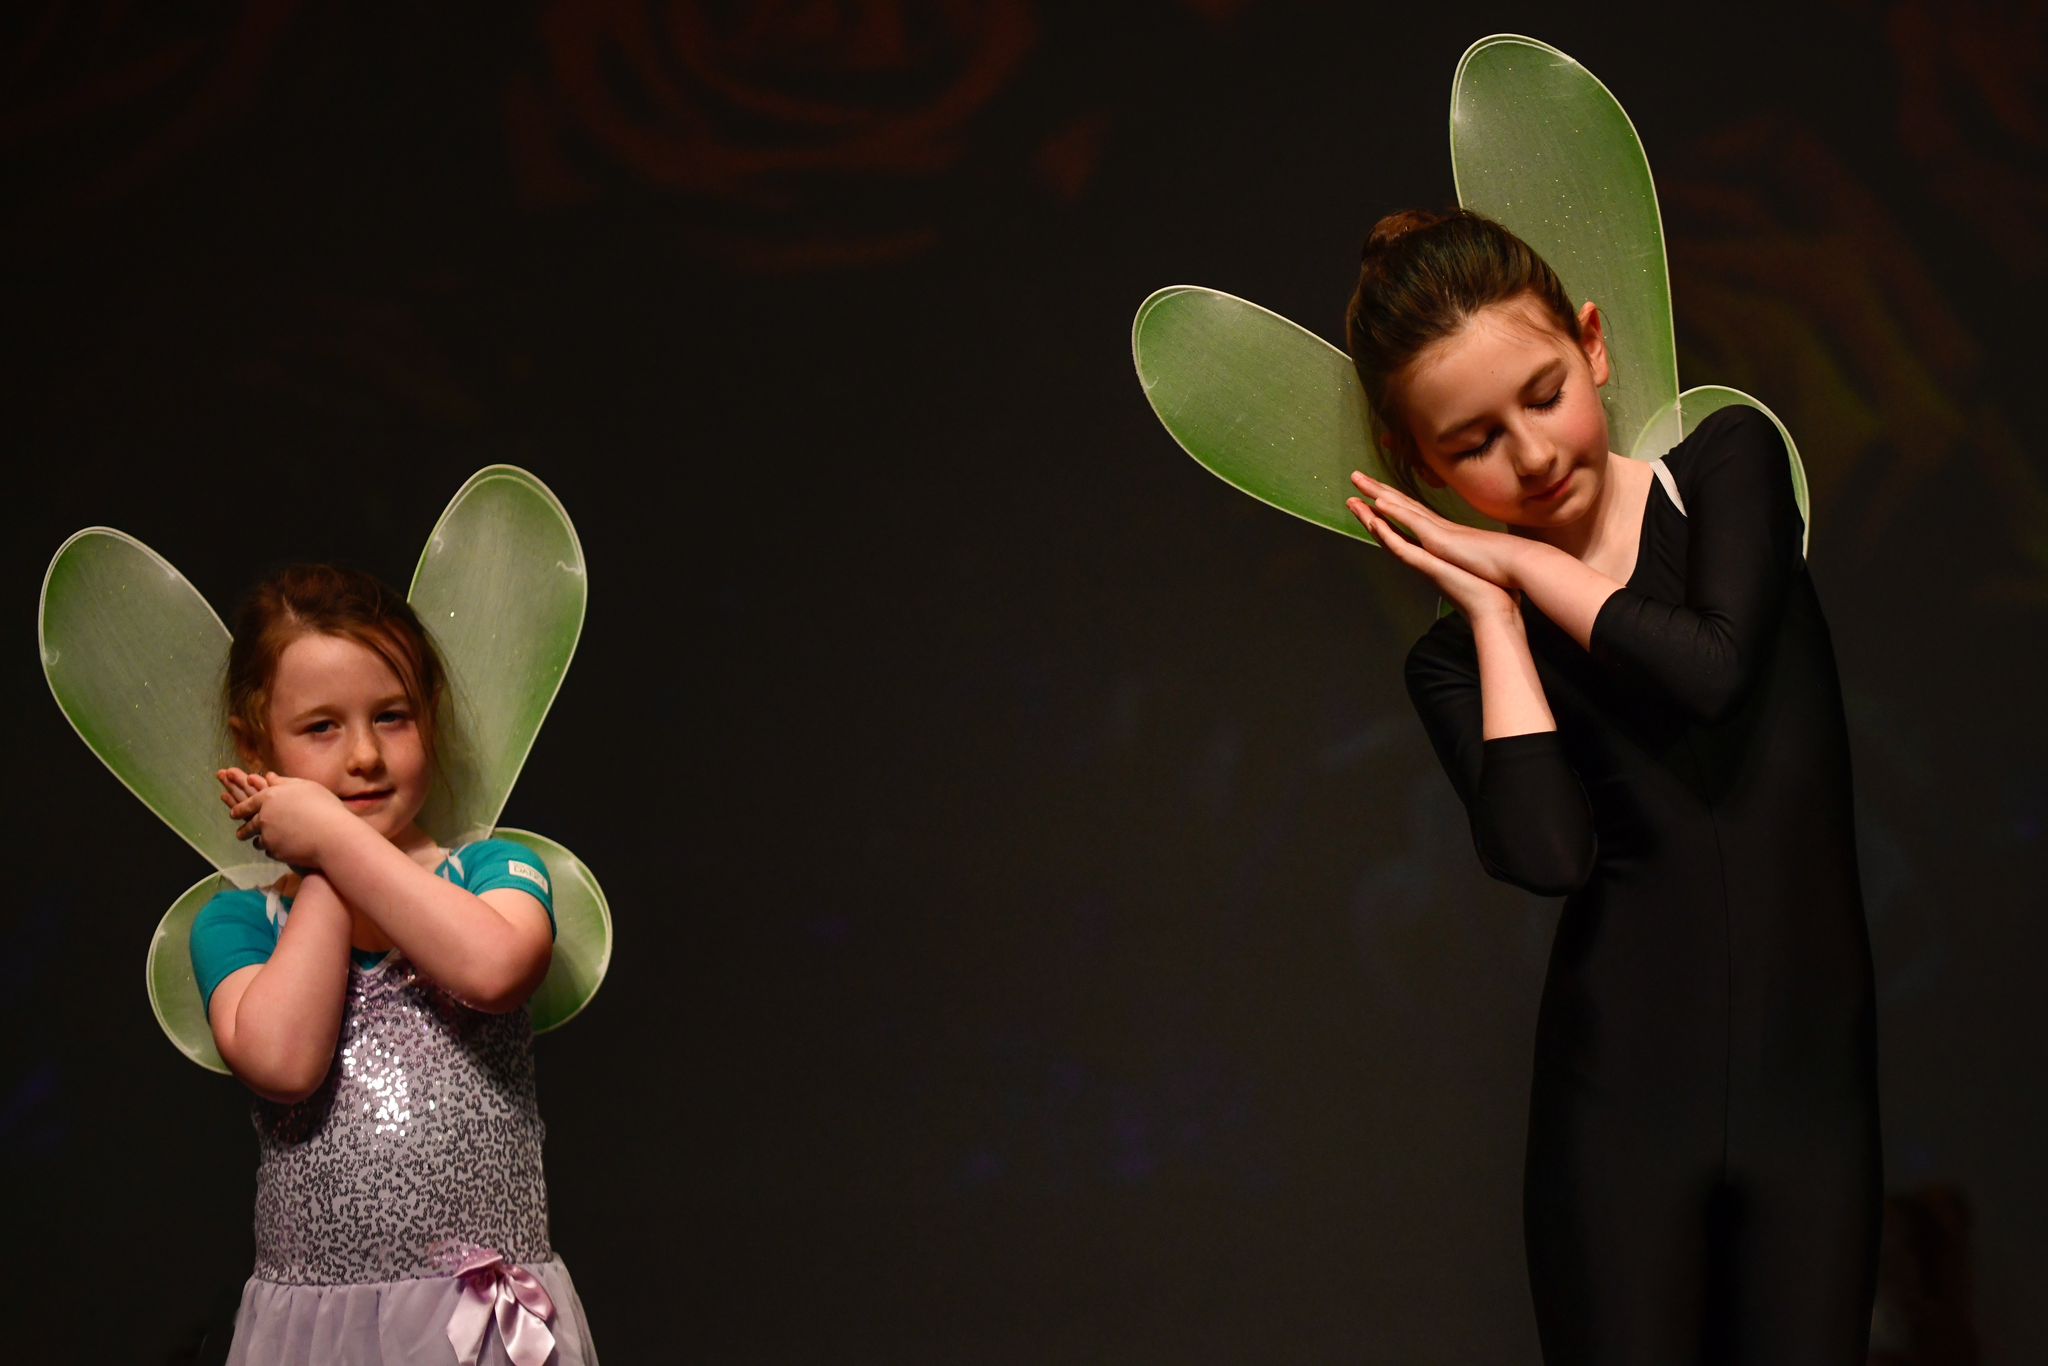 two young Irish girls wearing fairy wings on their leotards make a gesture of sleeping with their hands, they are on stage performing their ballet dance routine at a performance night for parents in Dublin, Ireland